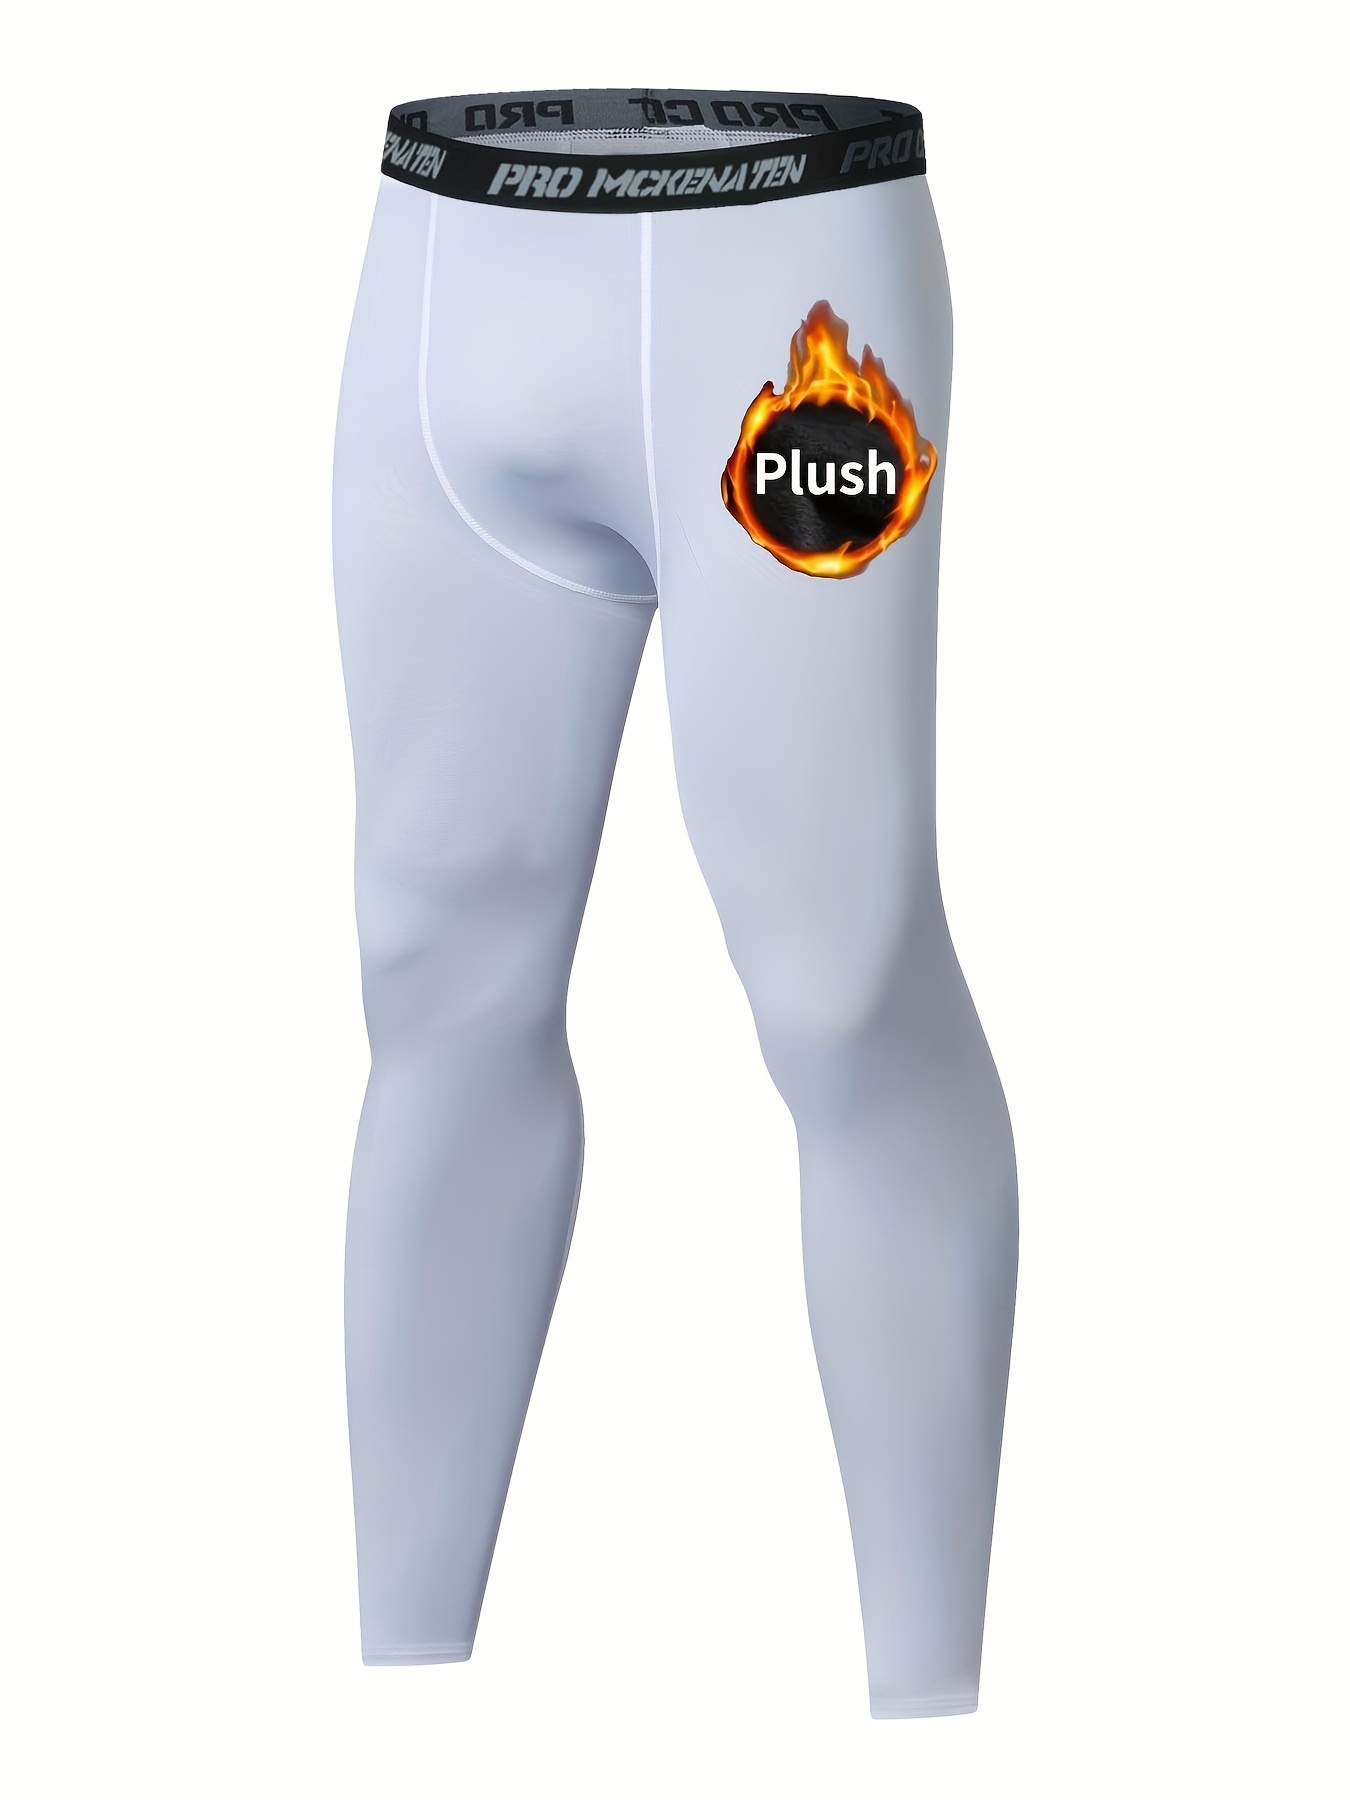 Warm Fleece Lined Thermal Leggings for Men Compression Pants for